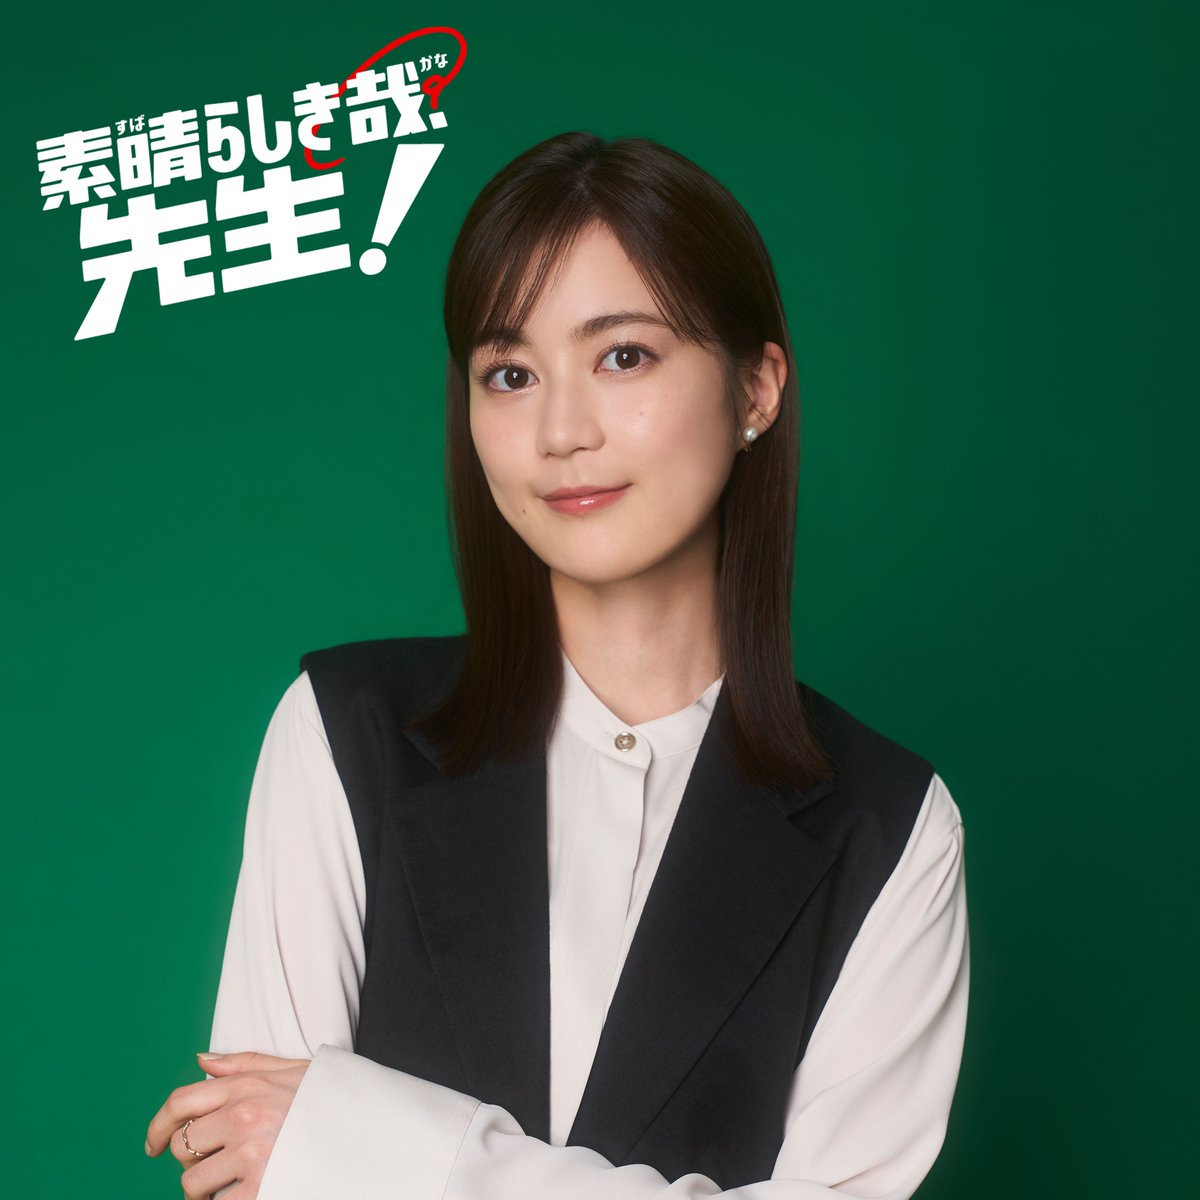 #IkutaErika to be leads in ABC TV drama 'Subarashiki Kana, Sensei!'. The story centers on a high school teacher with dreams and hopes in her heart, but in her second year, her daily life is so stressful that she's considering resigning. She vents her complaints on a secret social